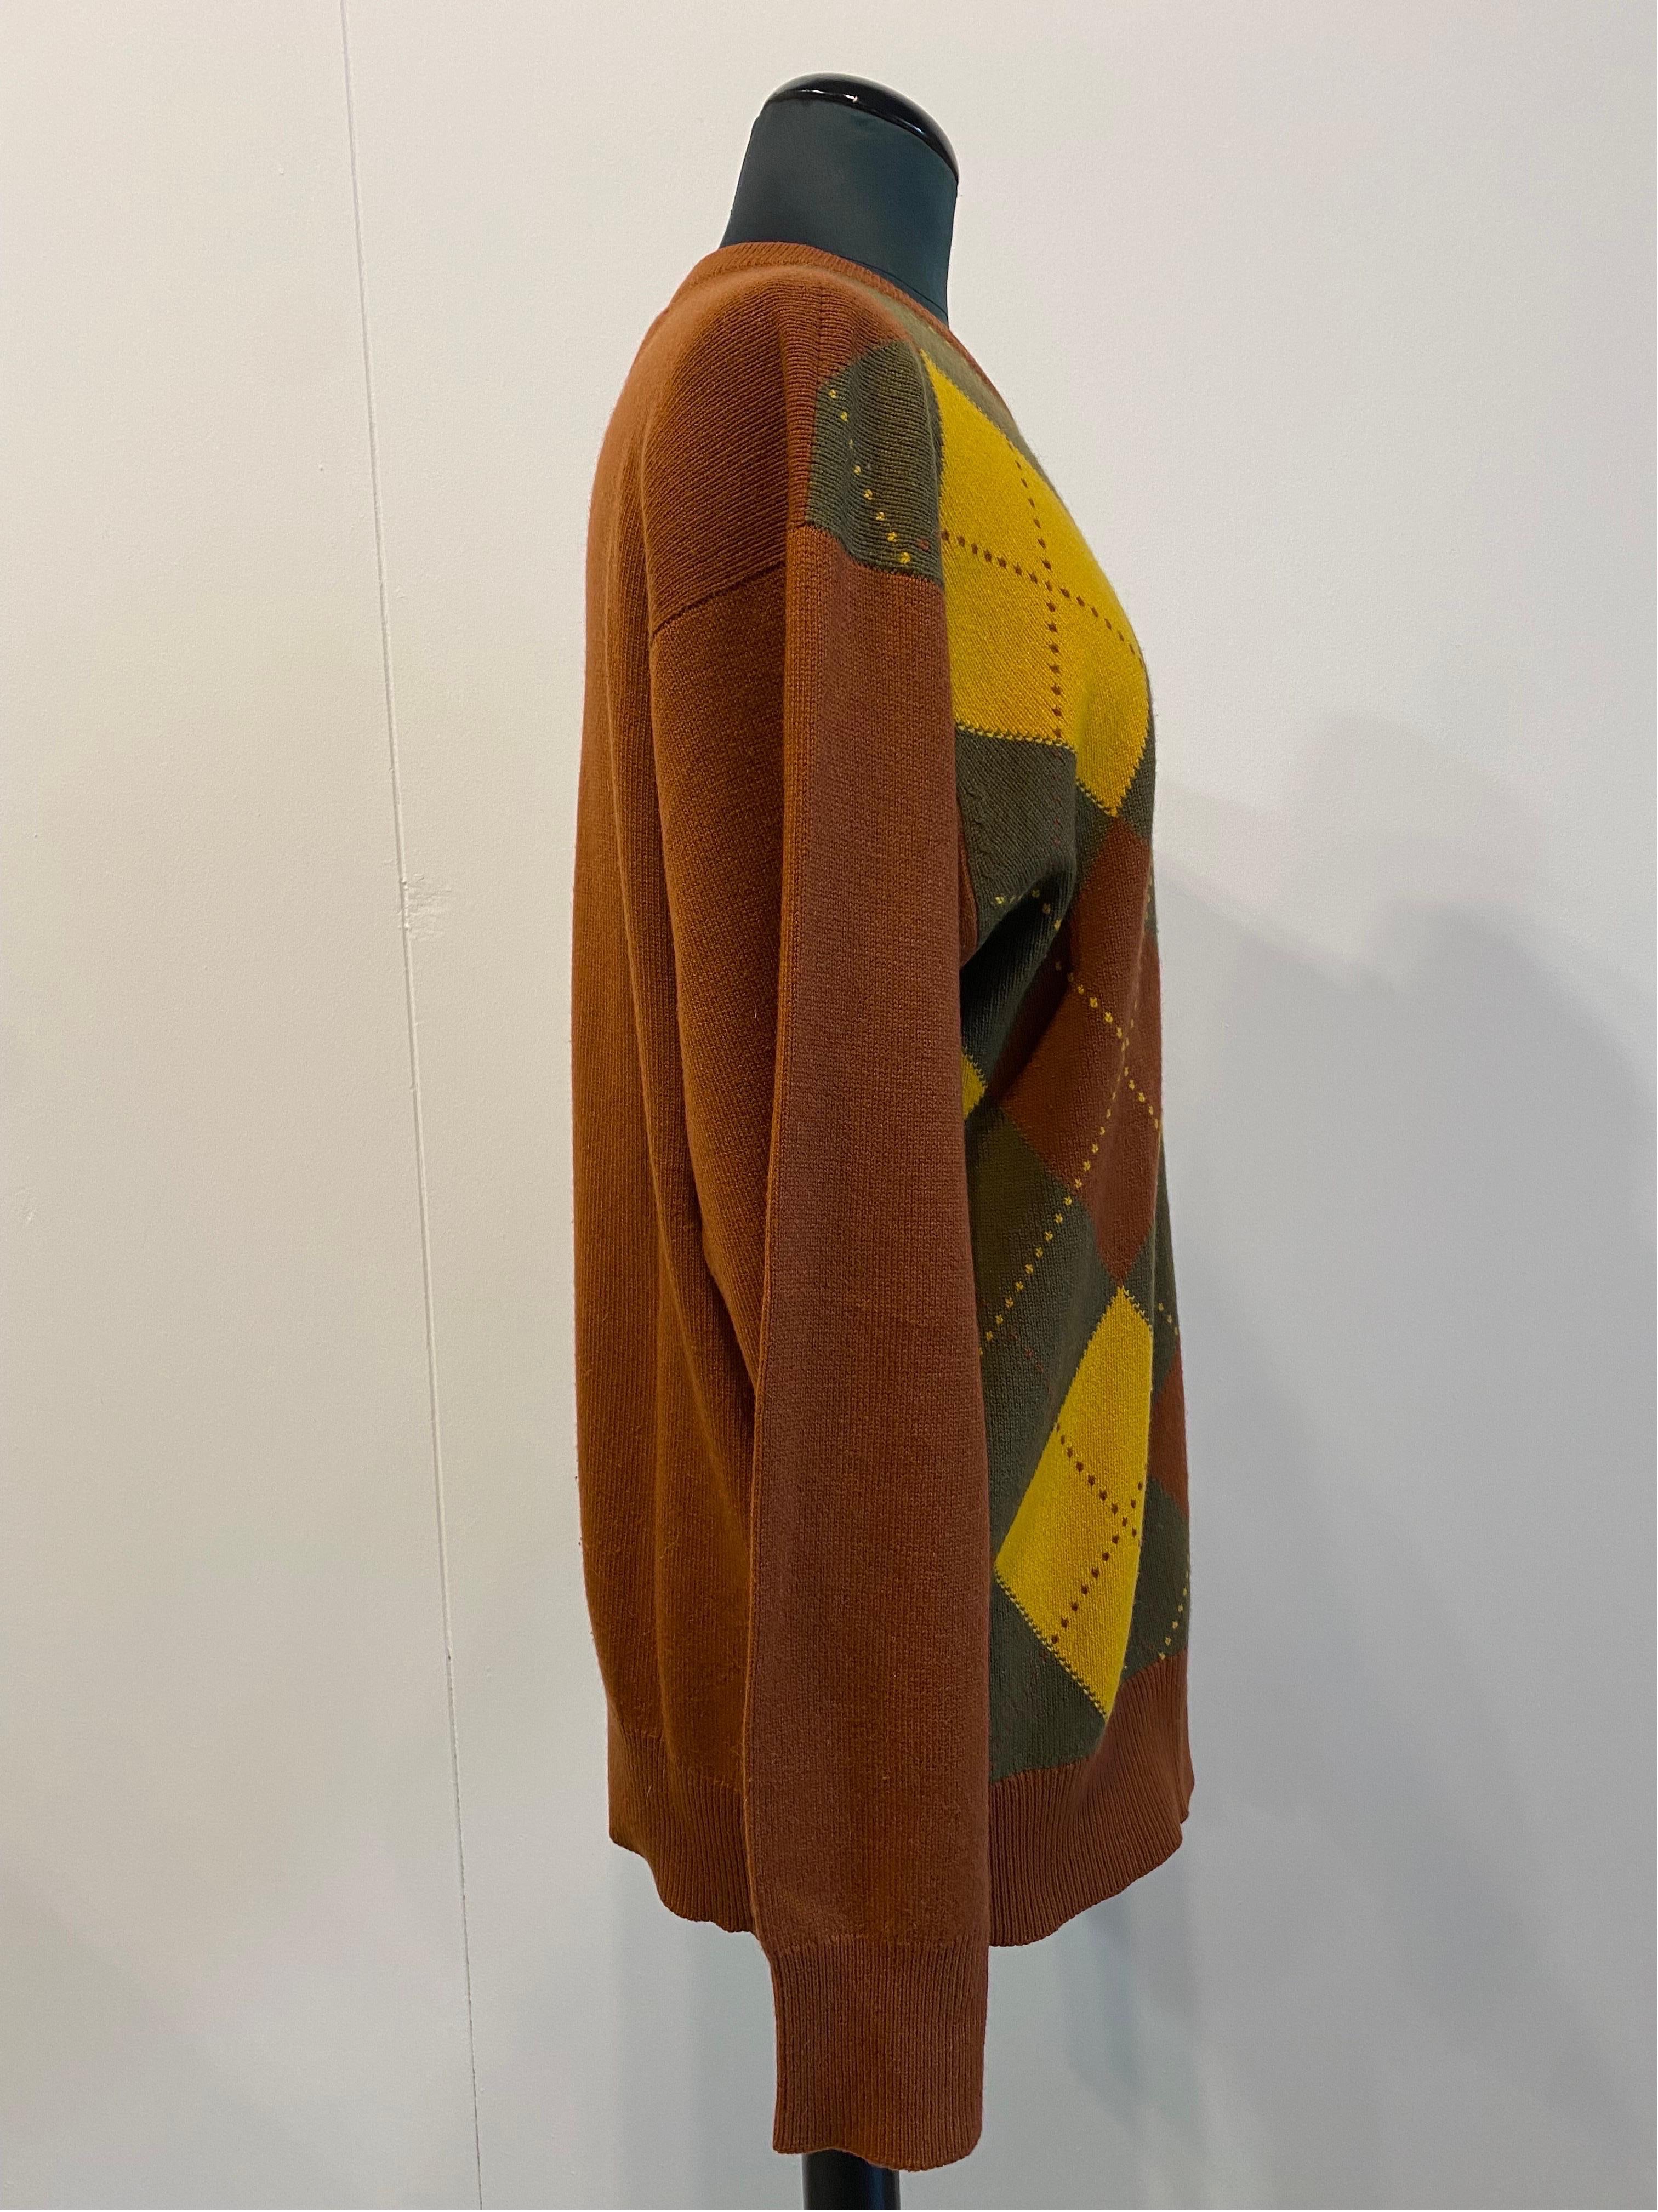 Ballantyne sweater.
In cashmere. Diamond pattern on the front in brown, yellow and green.
Size 46
Shoulder 50
Bust 55
Length 75
Sleeve length 65
More than good condition, it shows signs of normal use